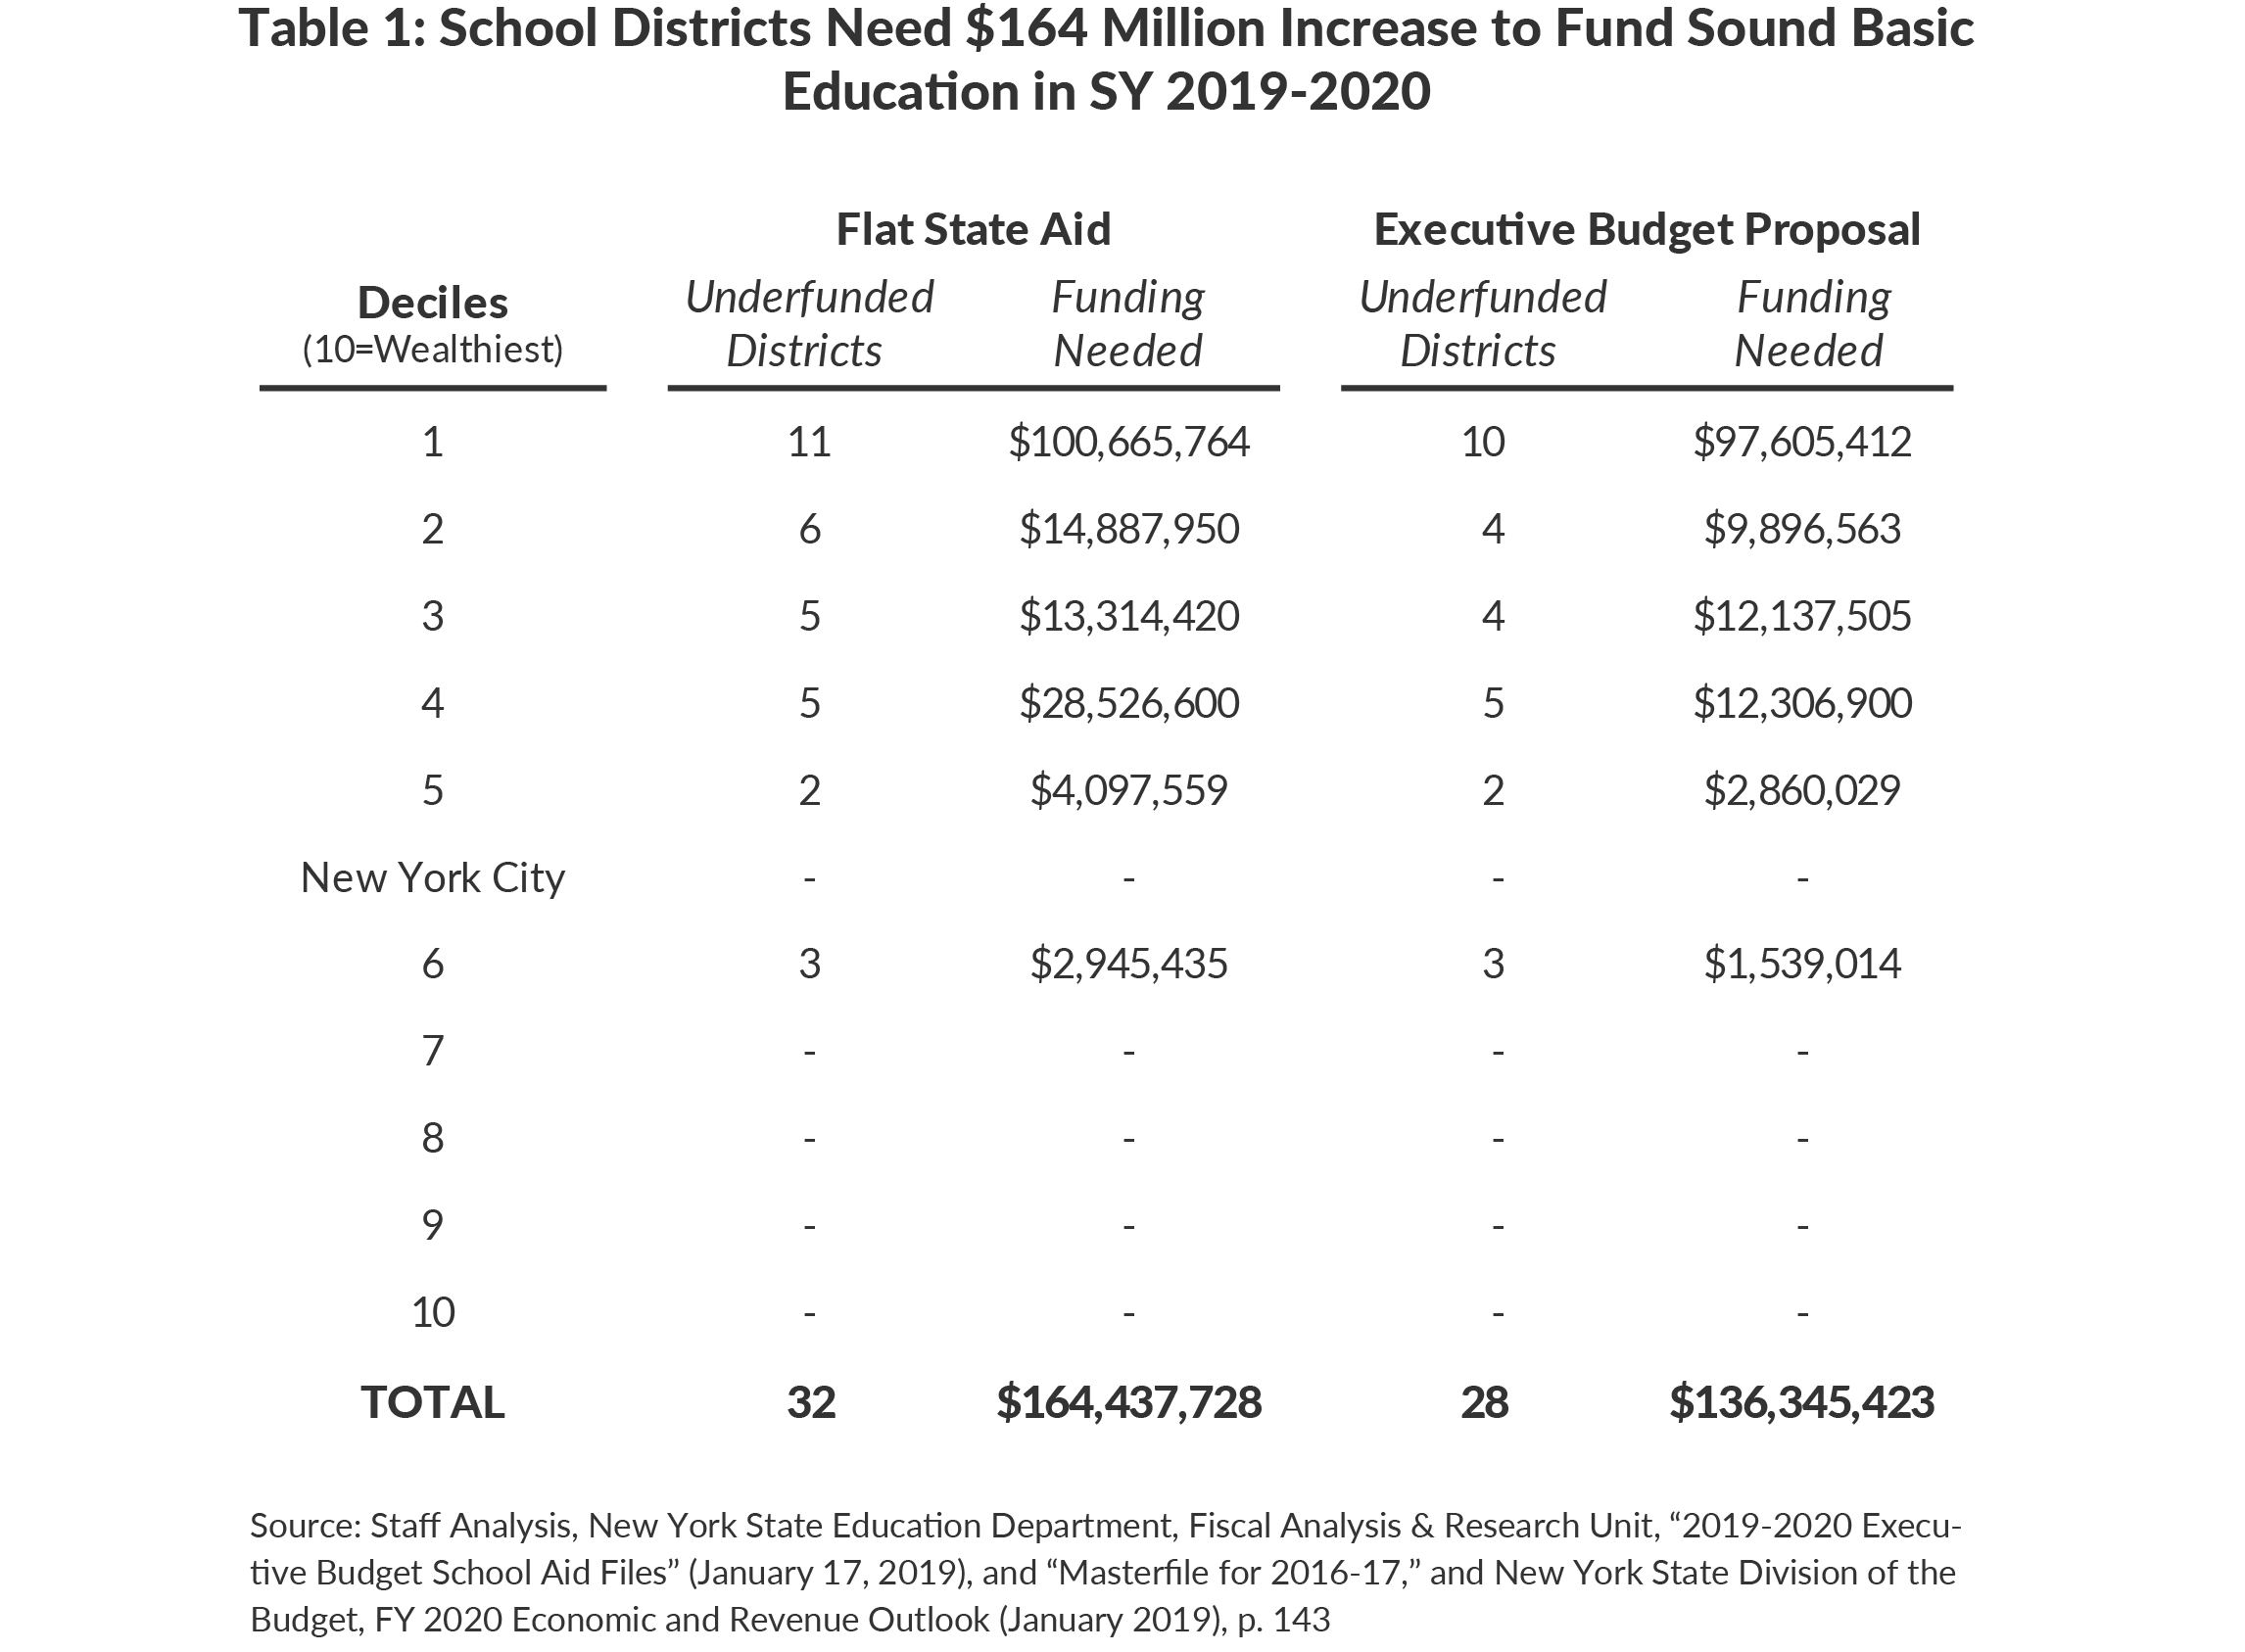 Table Table 1: SBE Can Be Funded Statewide for Additional $164 Million in SY 2019-2020